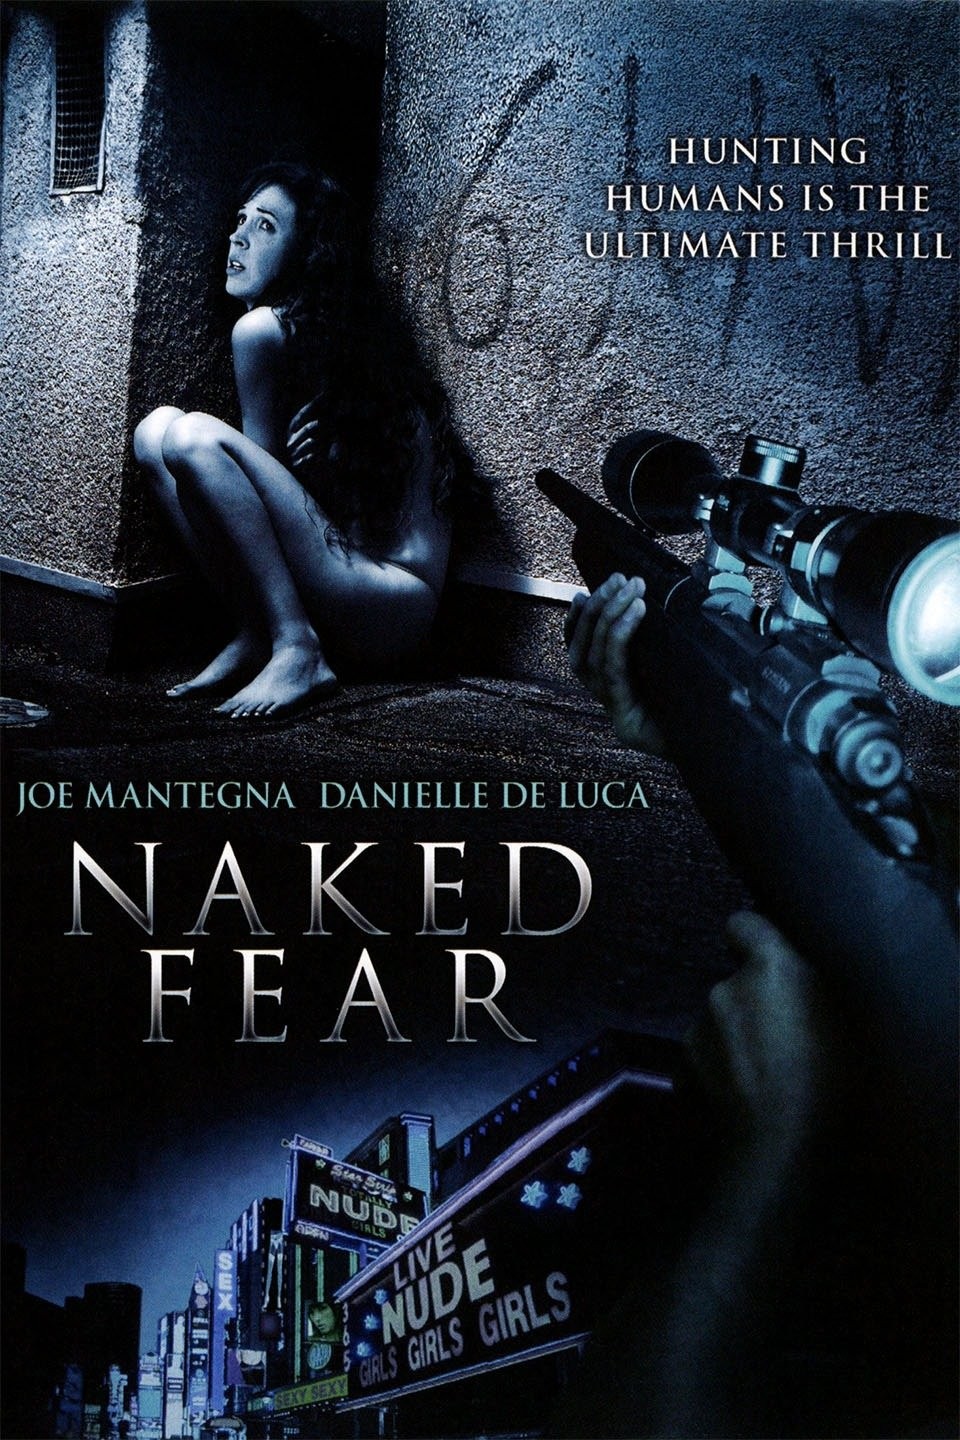 Naked fear 2007